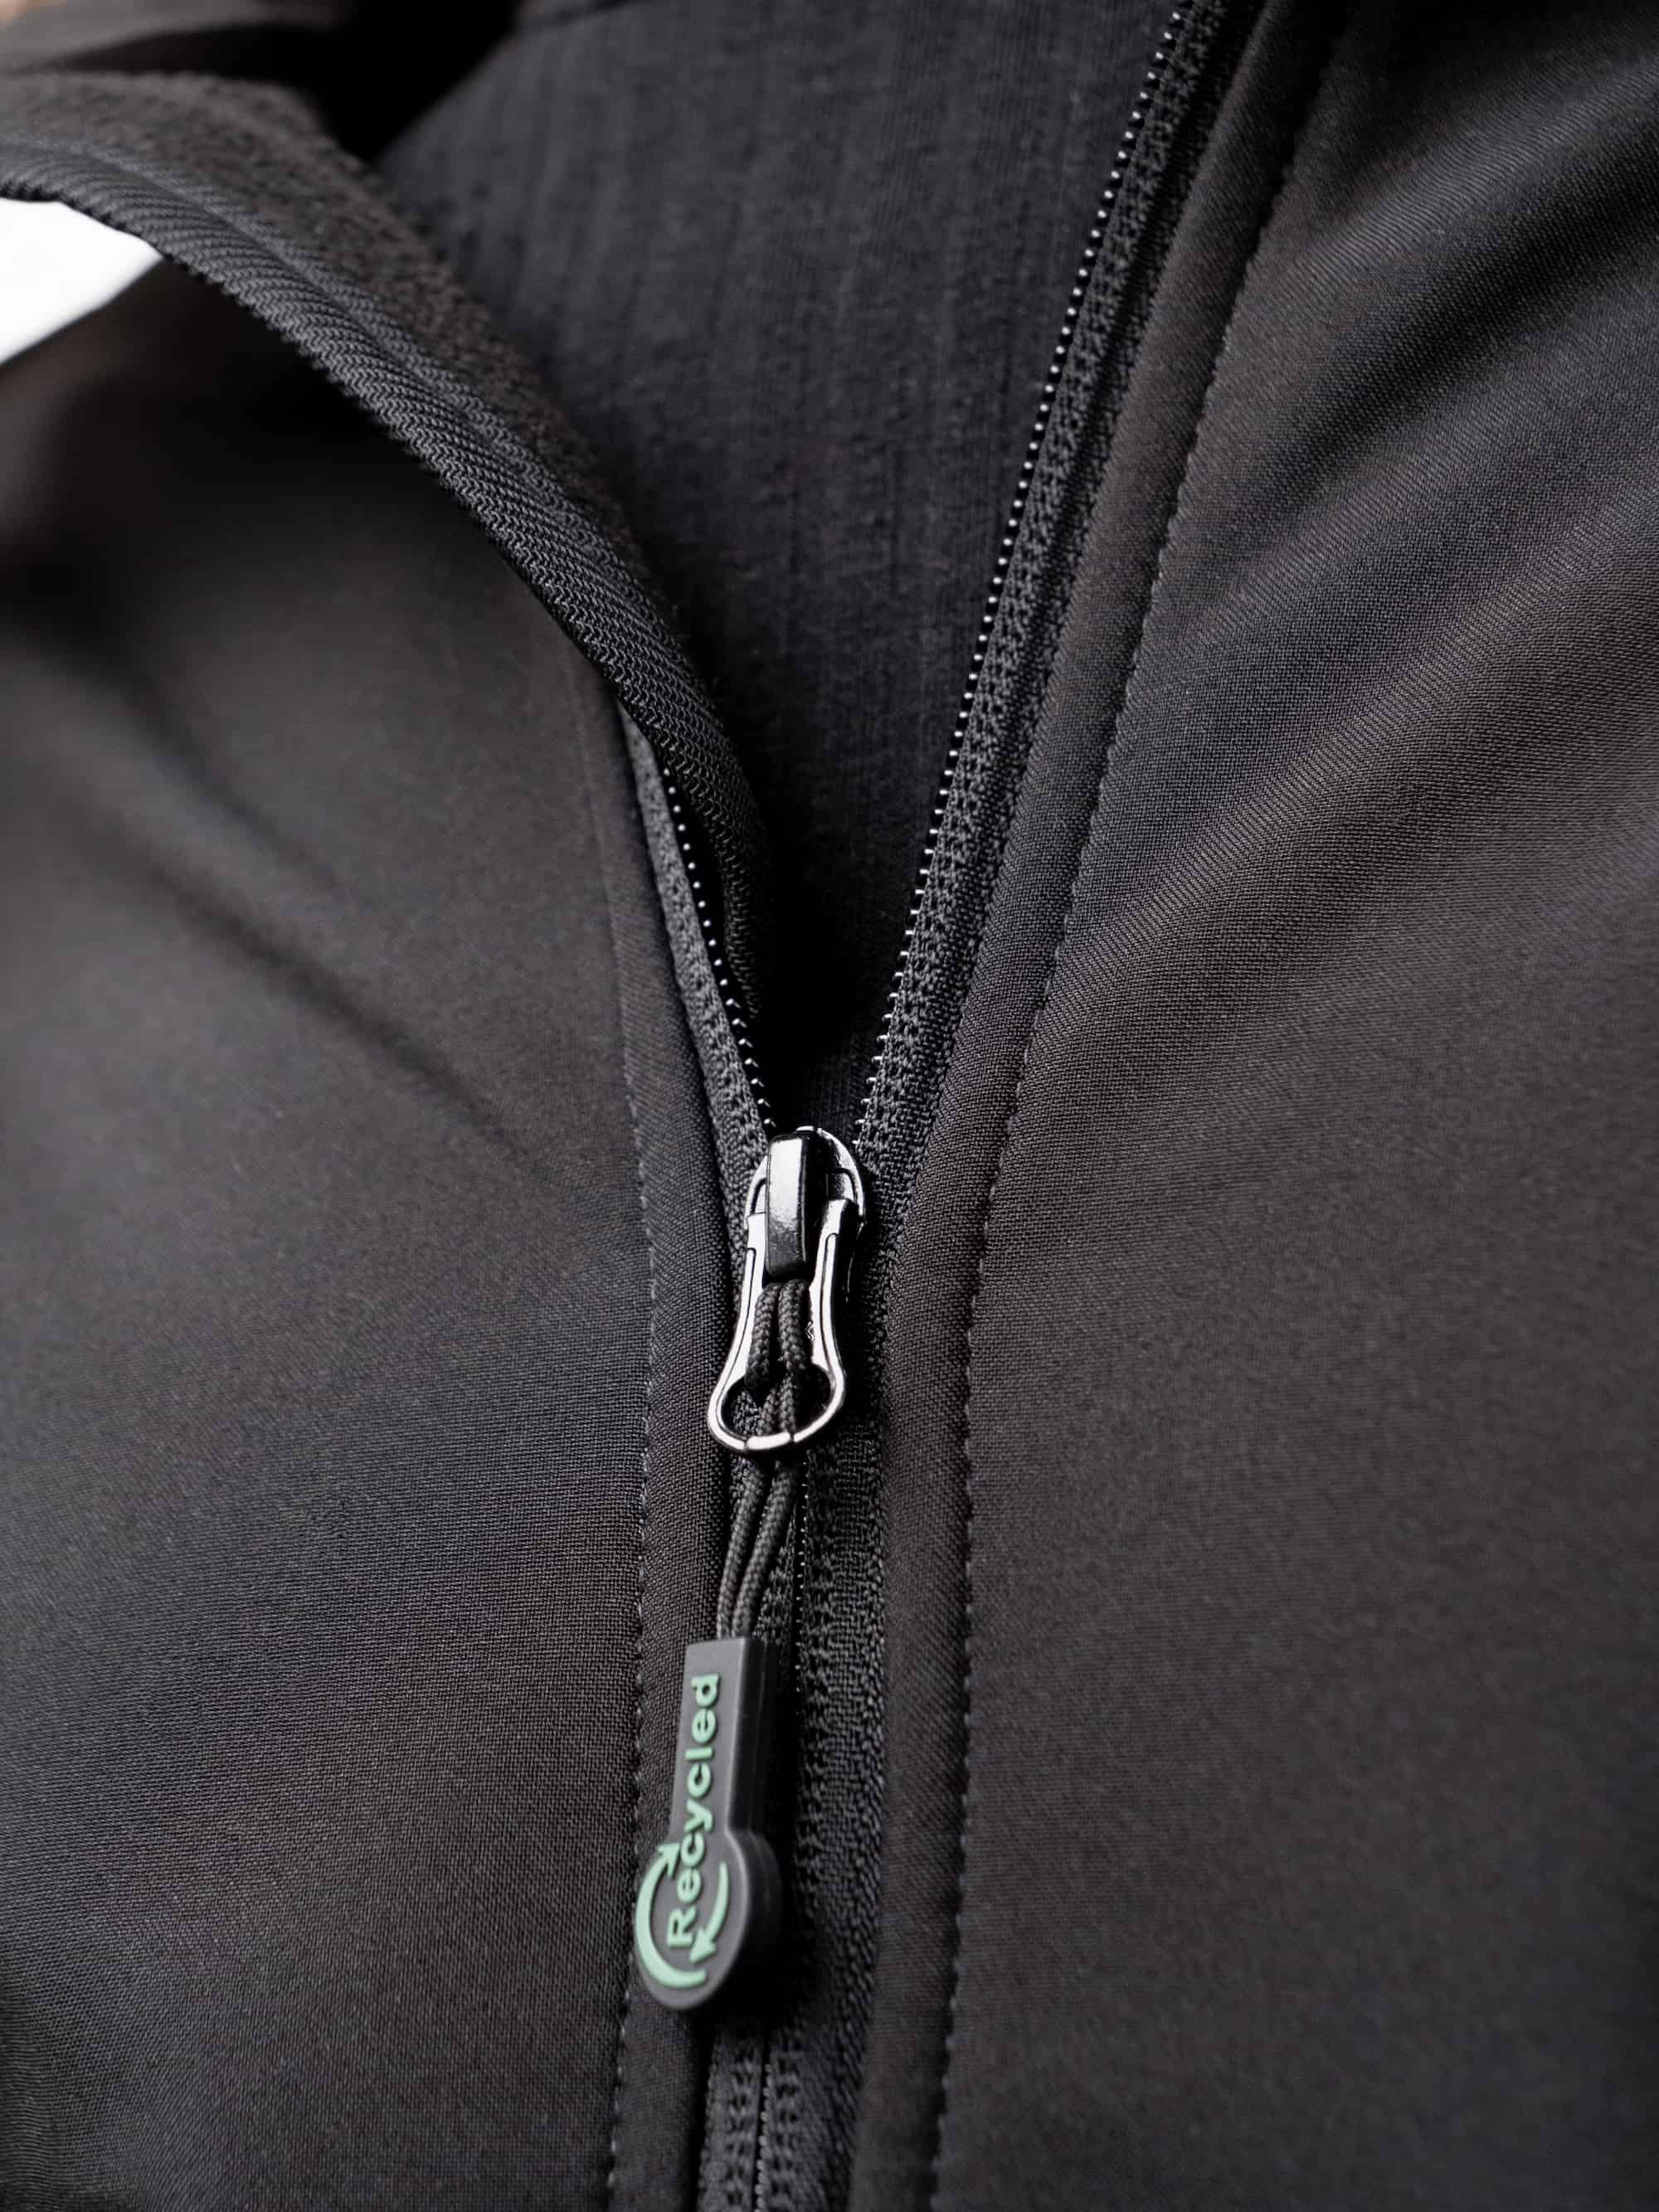 Eco-friendly zipper made from post-consumer recycled materia